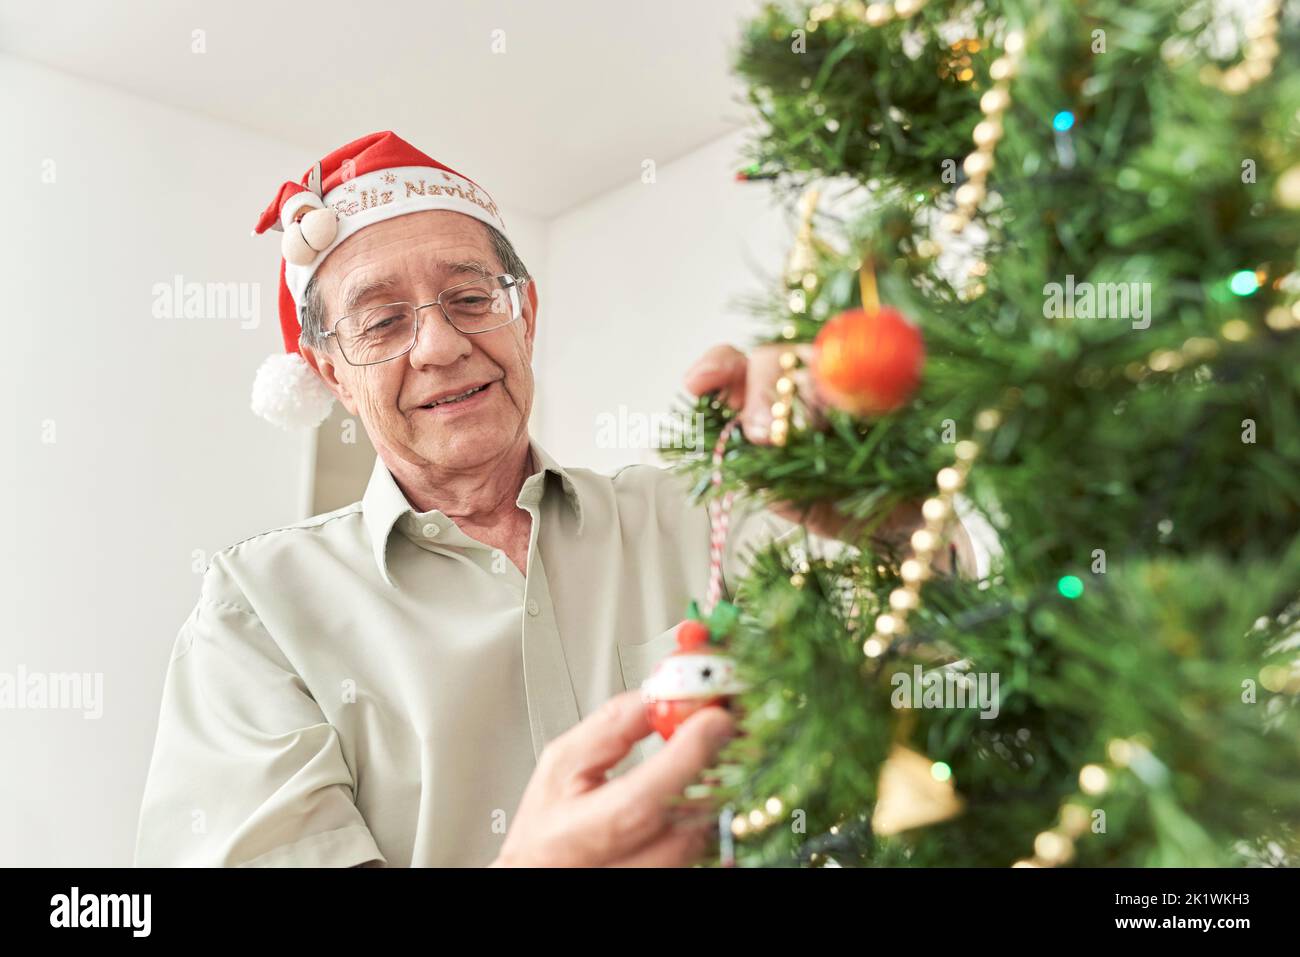 Happy senior hispanic man smiling while decorating a Christmas tree at home wearing a red Santa Claus beanie with a reindeer and the text Merry Christ Stock Photo